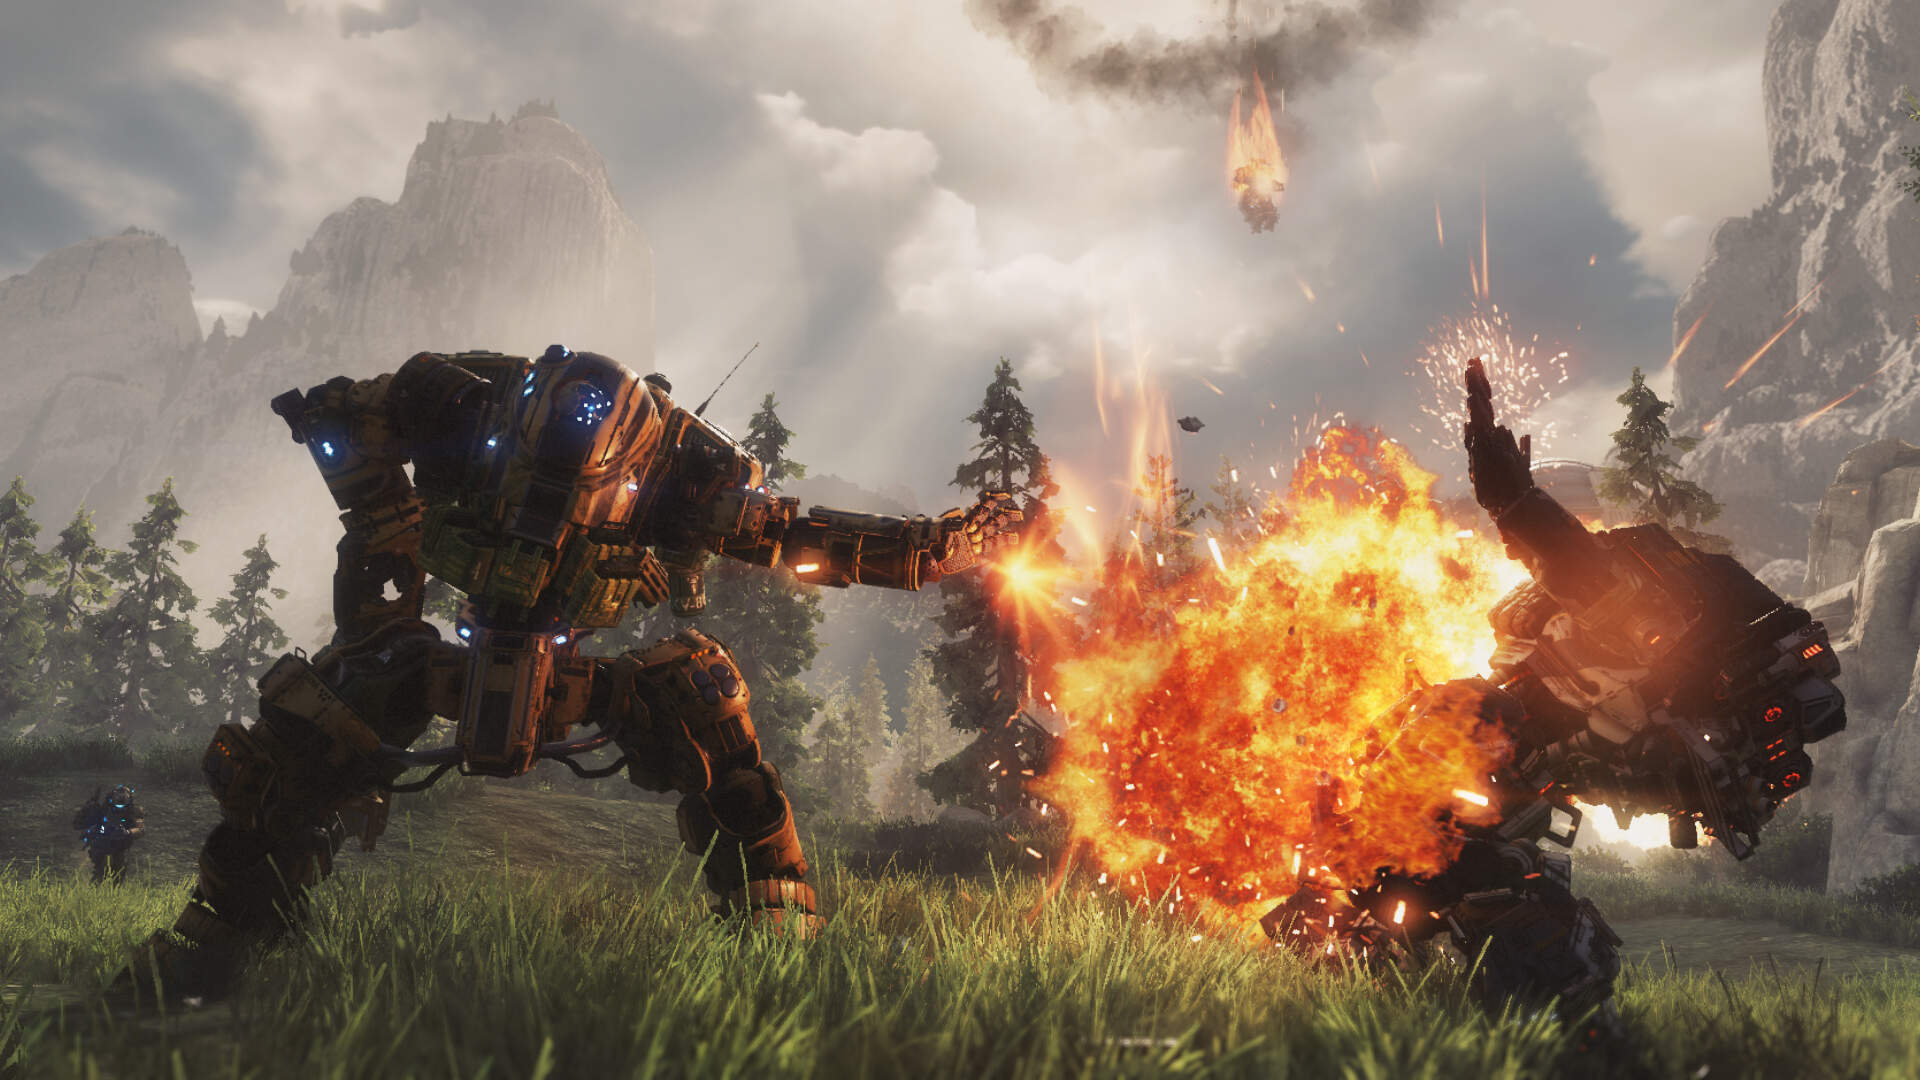 This mod allows Titanfall 2 players to create their own custom servers

